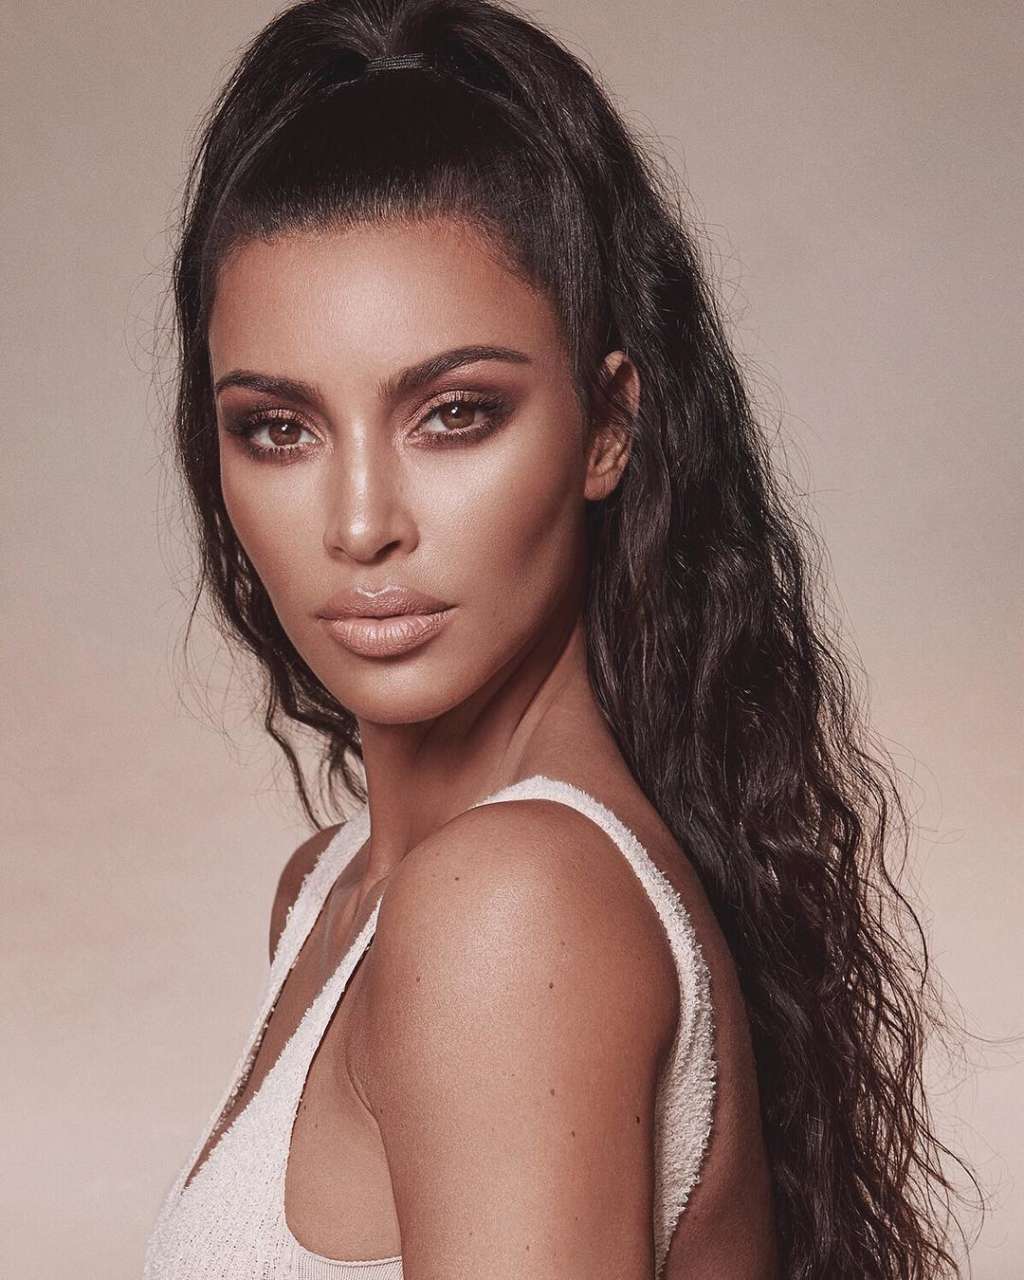 Kim Kardashian Steps Out in Low-Cut Look With Her Perfume 